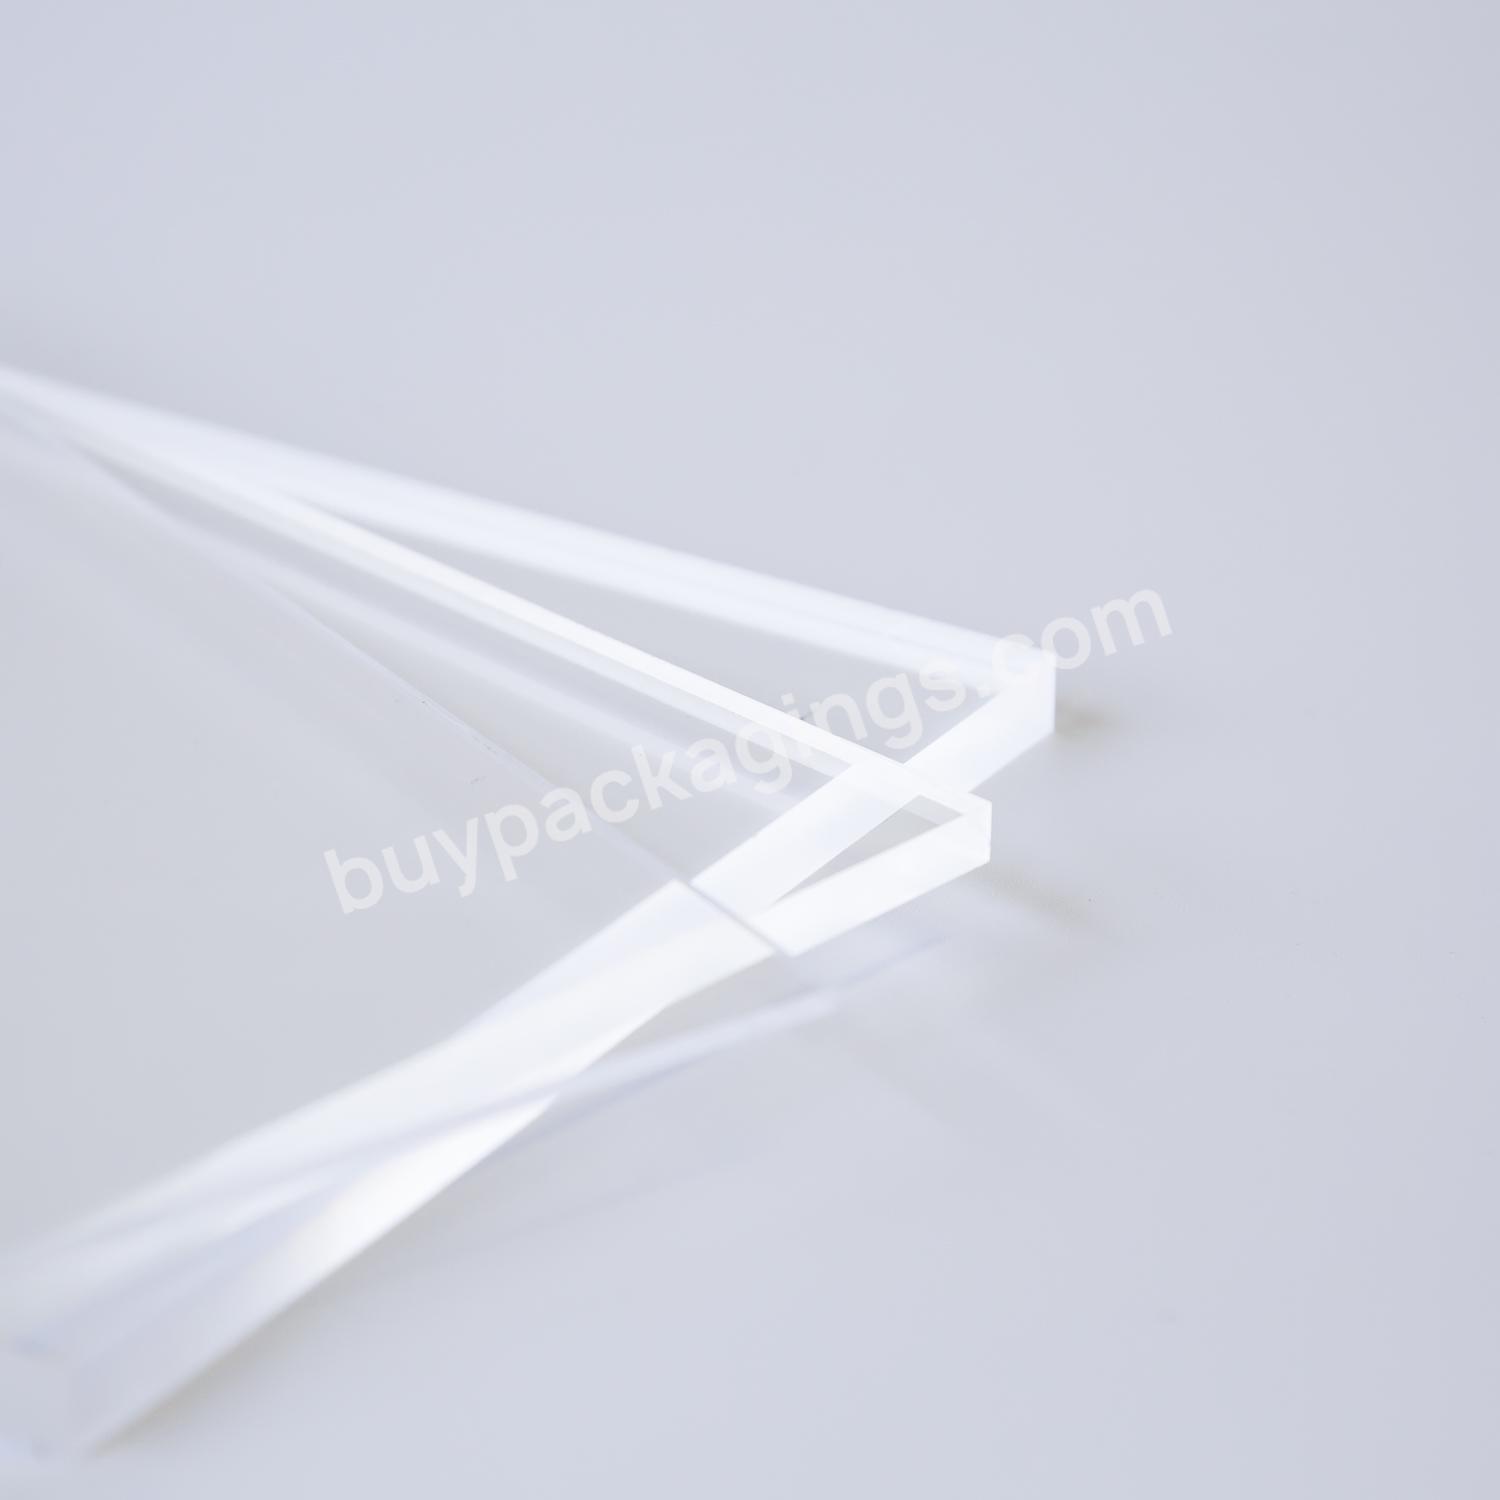 Clear 2050*3050 5mm Lucite Acrylic Plexyglass Perspex Clear Cast Acrylic Plastic Sheet - Buy Factory Direct Sale Custom Size 2mm-50mm 5ftx7ft Ple Xiglass Sheets Acrylic Plexyglass Sheet,3mm 48x96 Plexyglass,Excellent Plexyglass 4*8 Transparent 3 4 5m